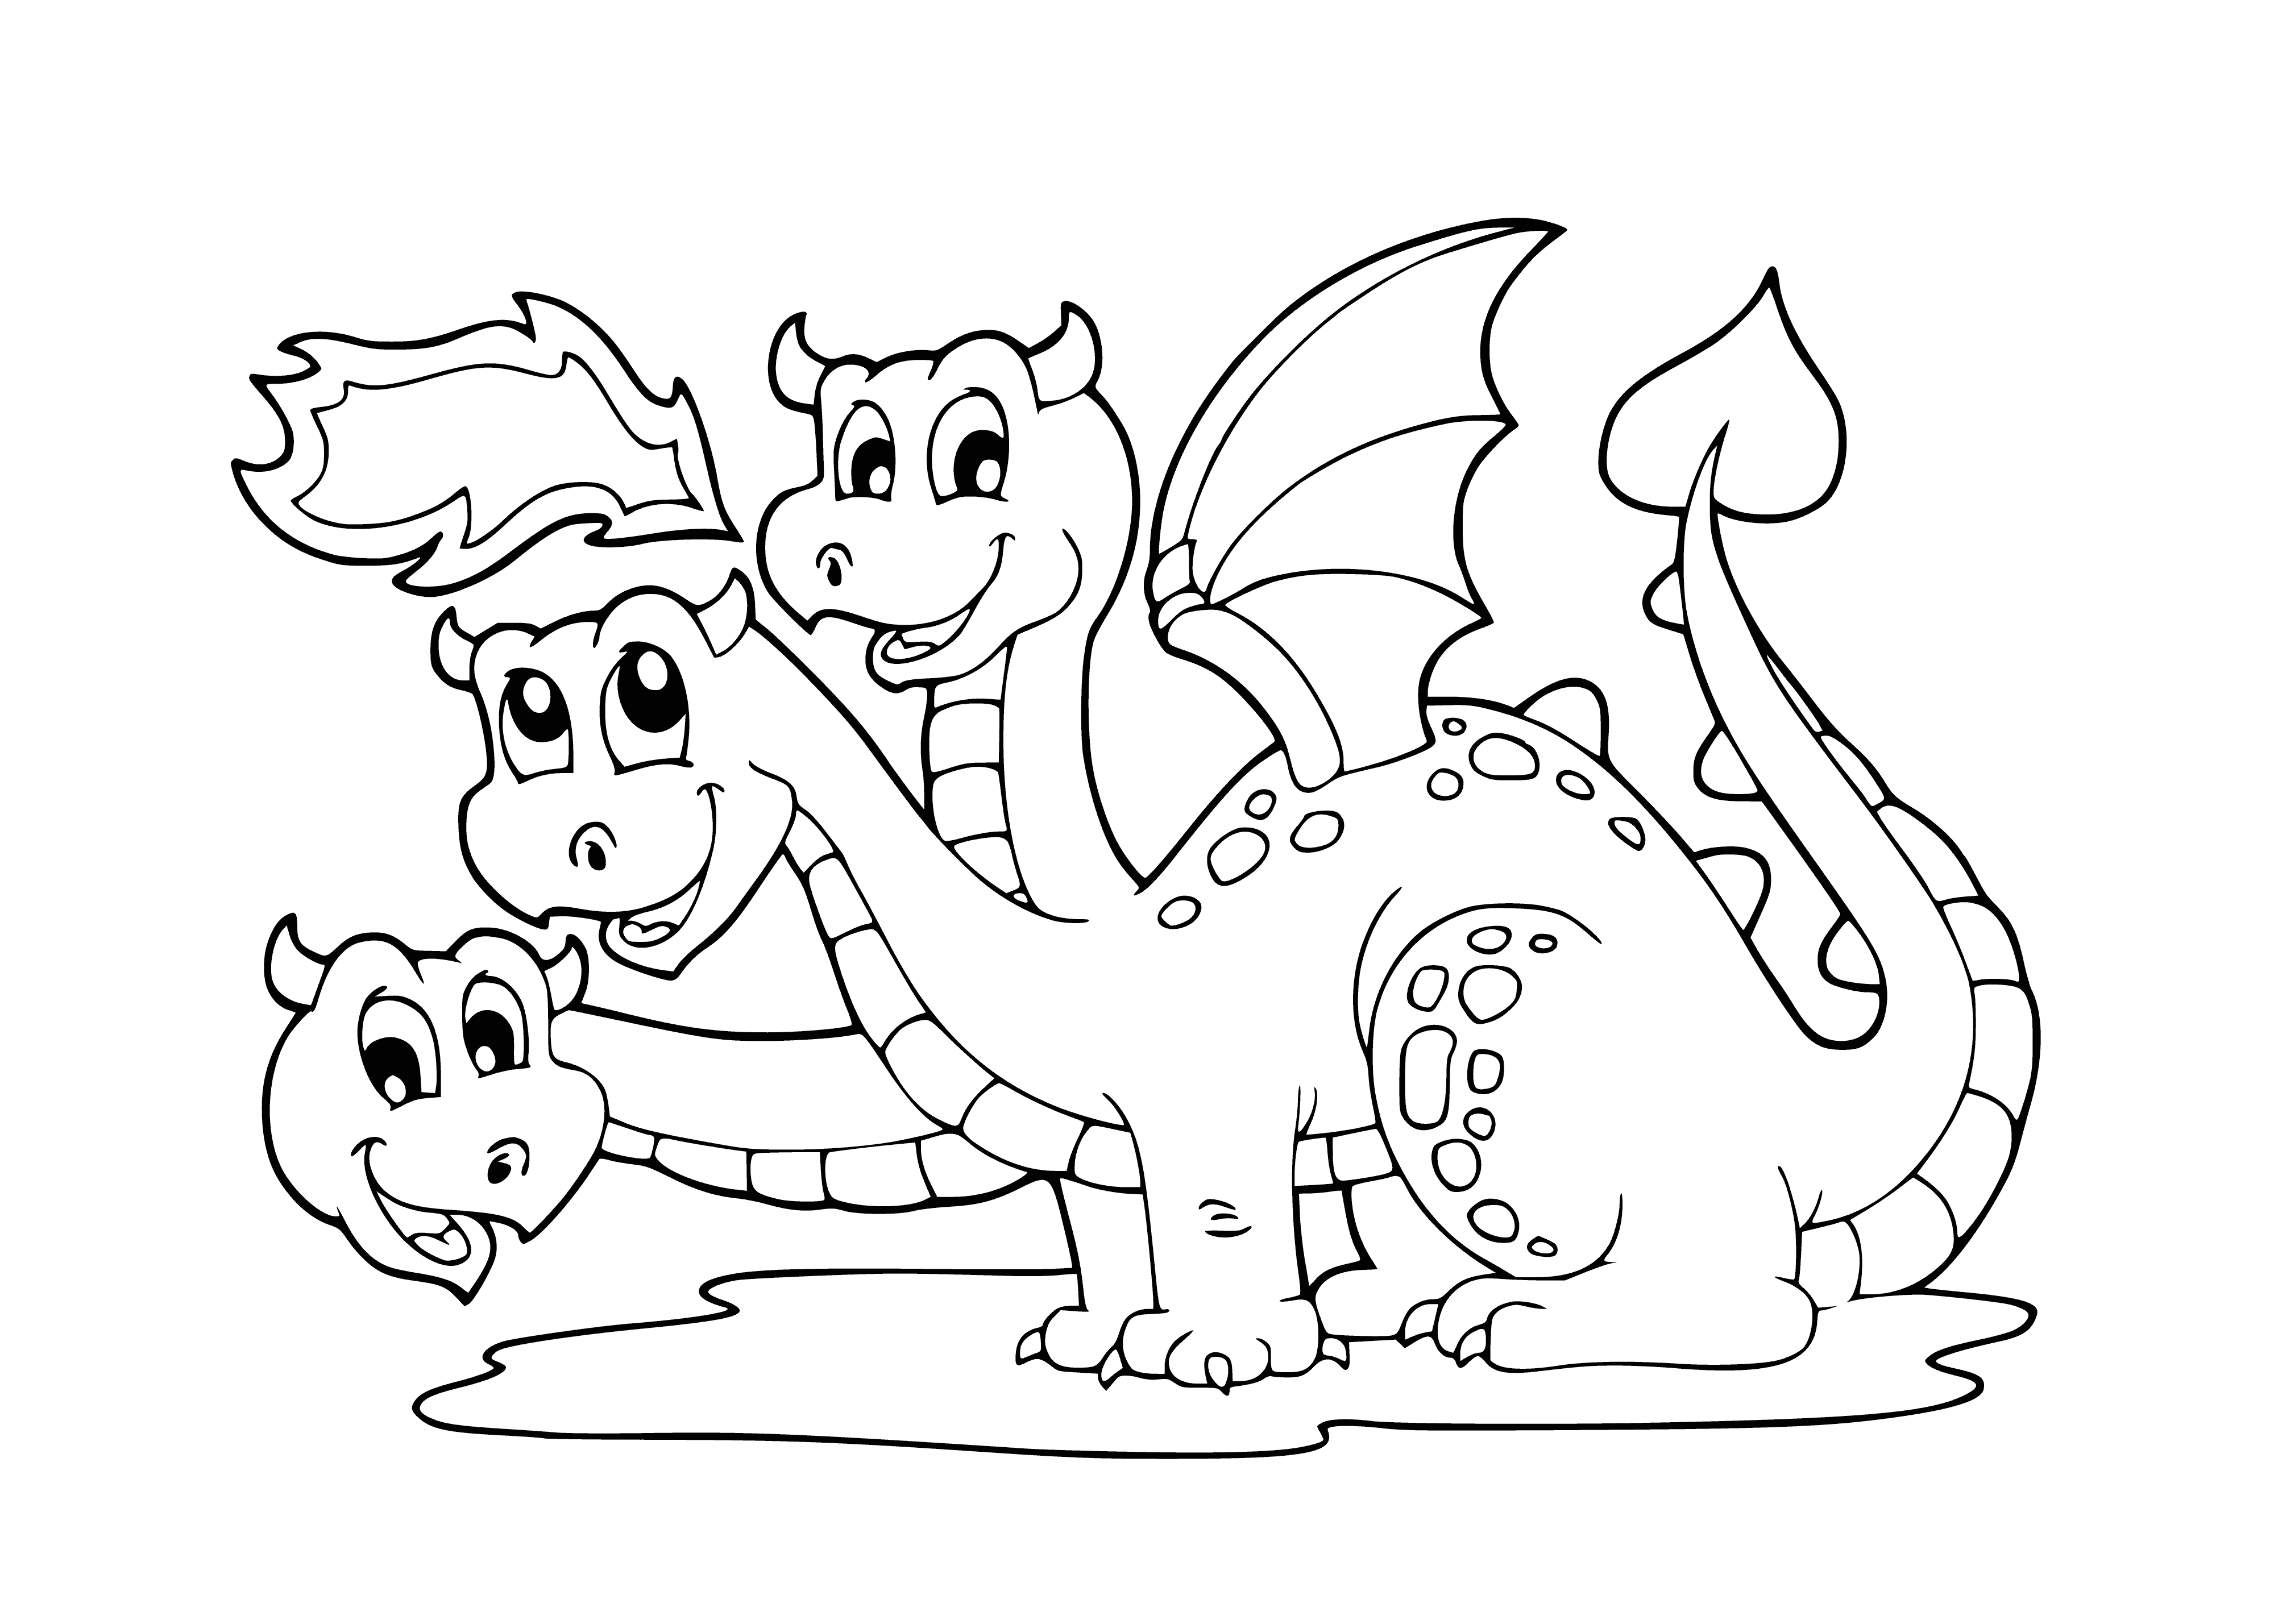 coloring page: Three-headed dragon surrounded by flames, three heads express anger, cunning, and sleepiness. Body a deep green, scales black, belly bright orange, wings a mix of green and black.